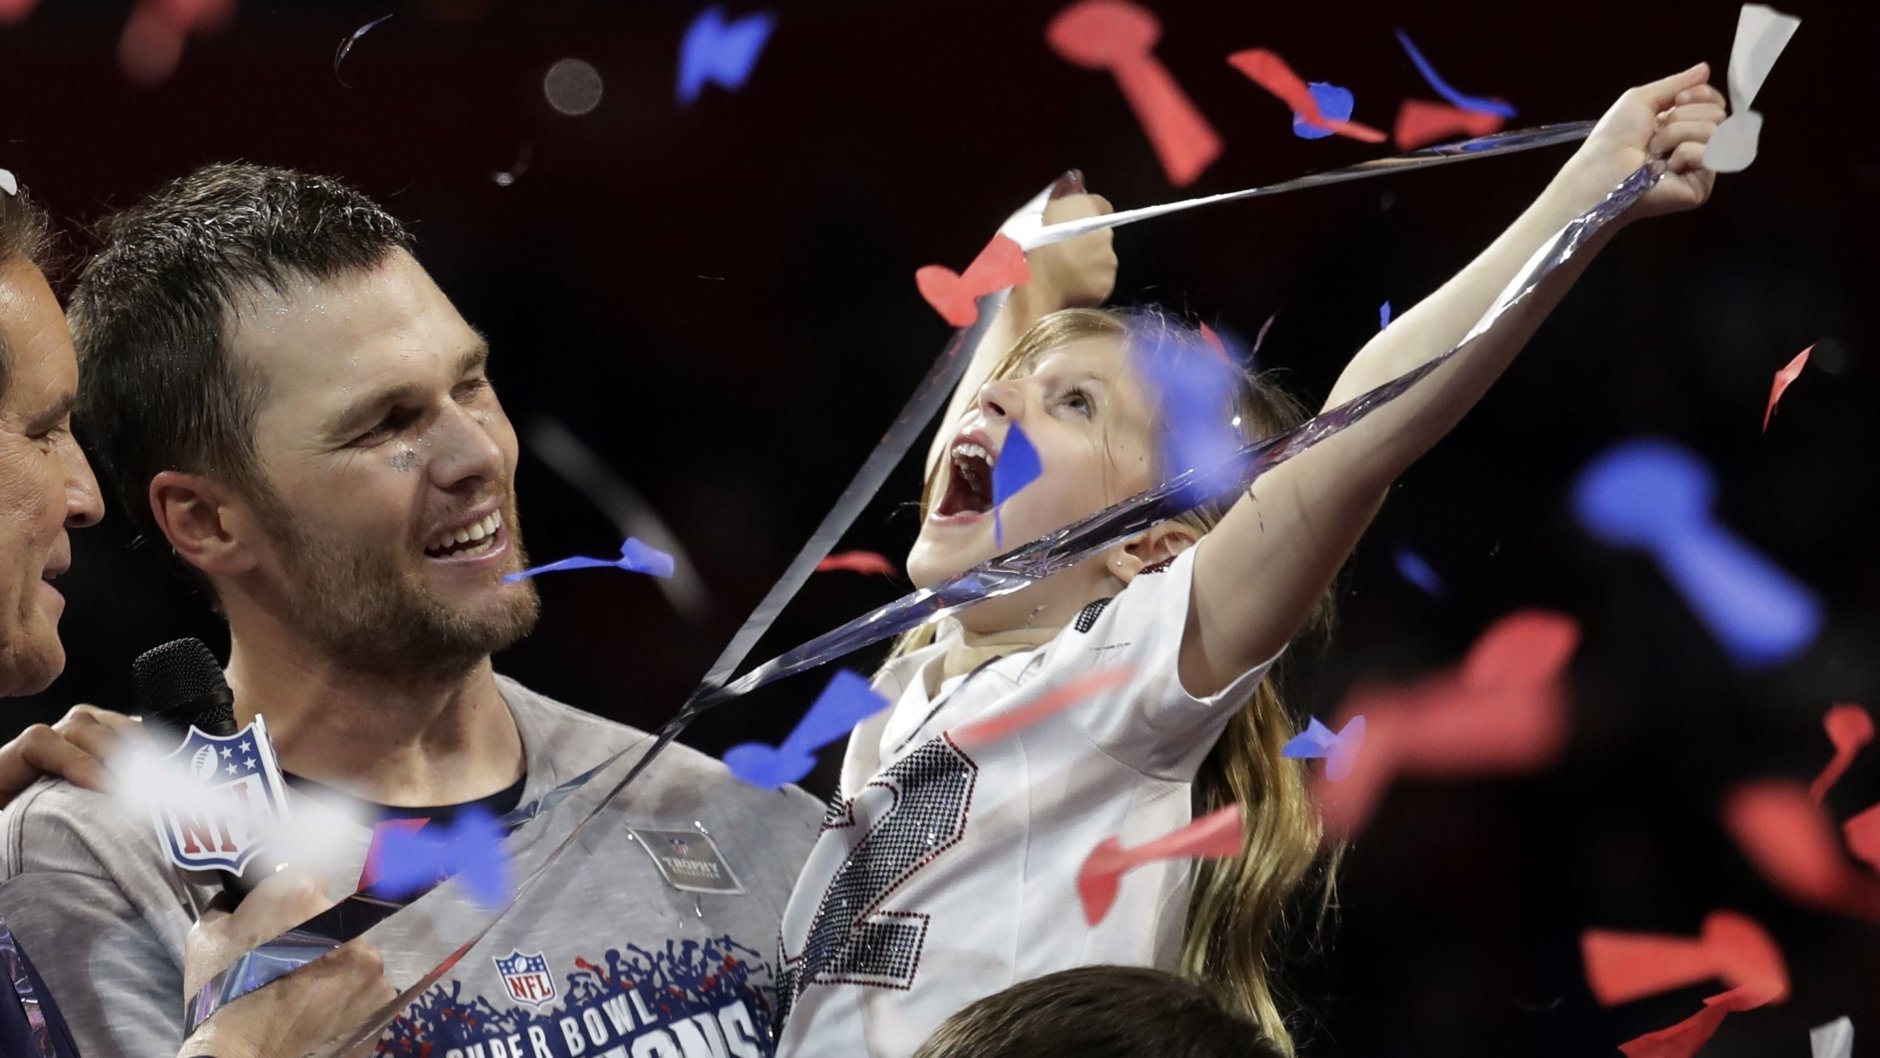 New England Patriots' Tom Brady holds his daughter, Vivian, after the NFL Super Bowl 53 football game against the Los Angeles Rams, Sunday, Feb. 3, 2019, in Atlanta. The Patriots won 13-3. (AP Photo/Lynne Sladky)